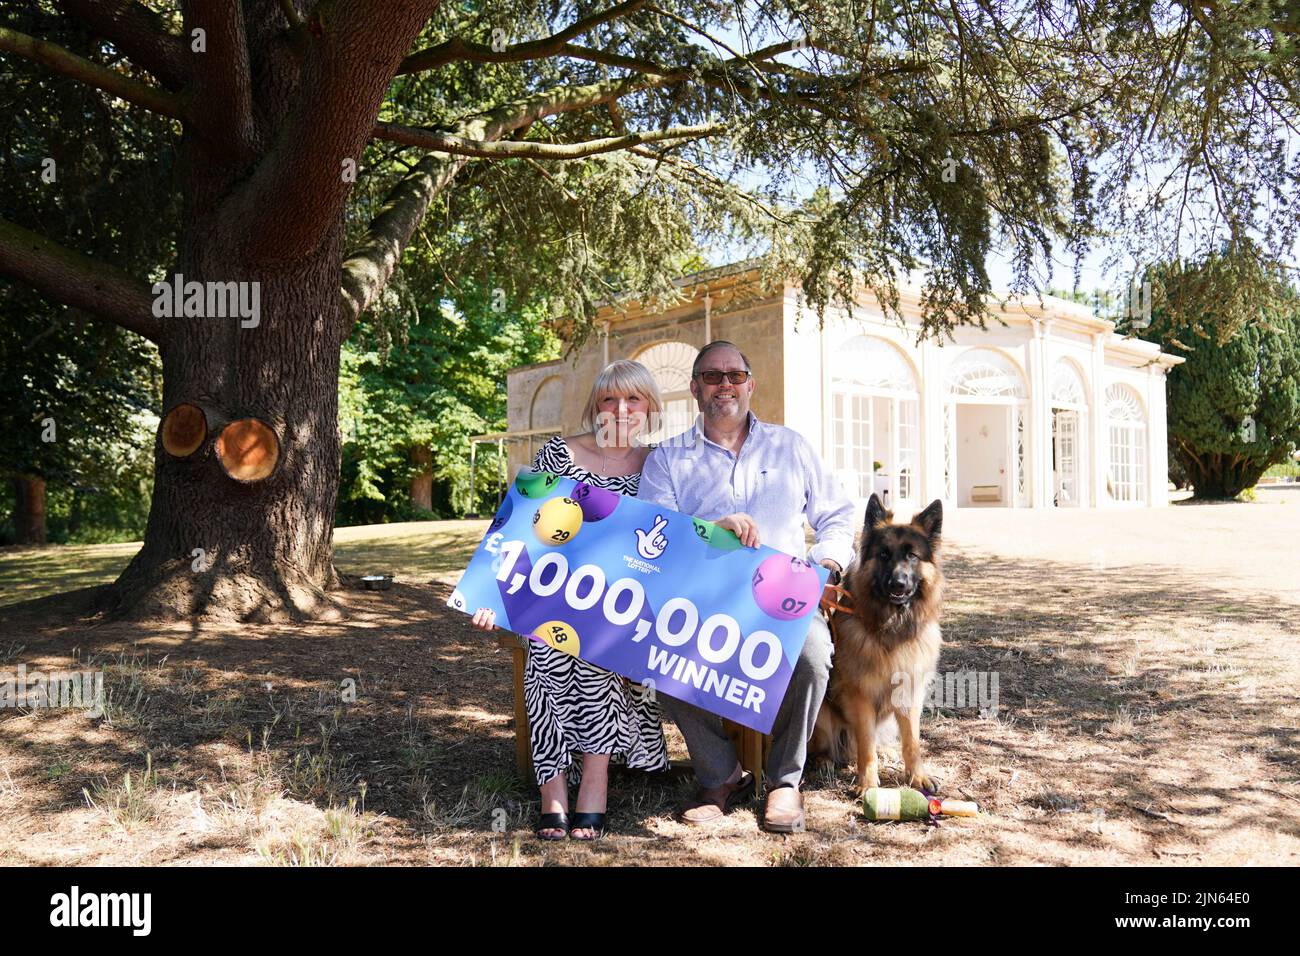 NHS worker Maxine Lloyd, her fiance Wayne Tilbury from Kettering and their German Shepherd dog Rosco, celebrate her £1 million win on one of the National Lottery's instant win games at Barton Hall Hotel in Kettering, Northamptonshire, which became a double-celebration when she received the all-clear for breast cancer a few days later. Picture date: Tuesday August 9, 2022. Stock Photo